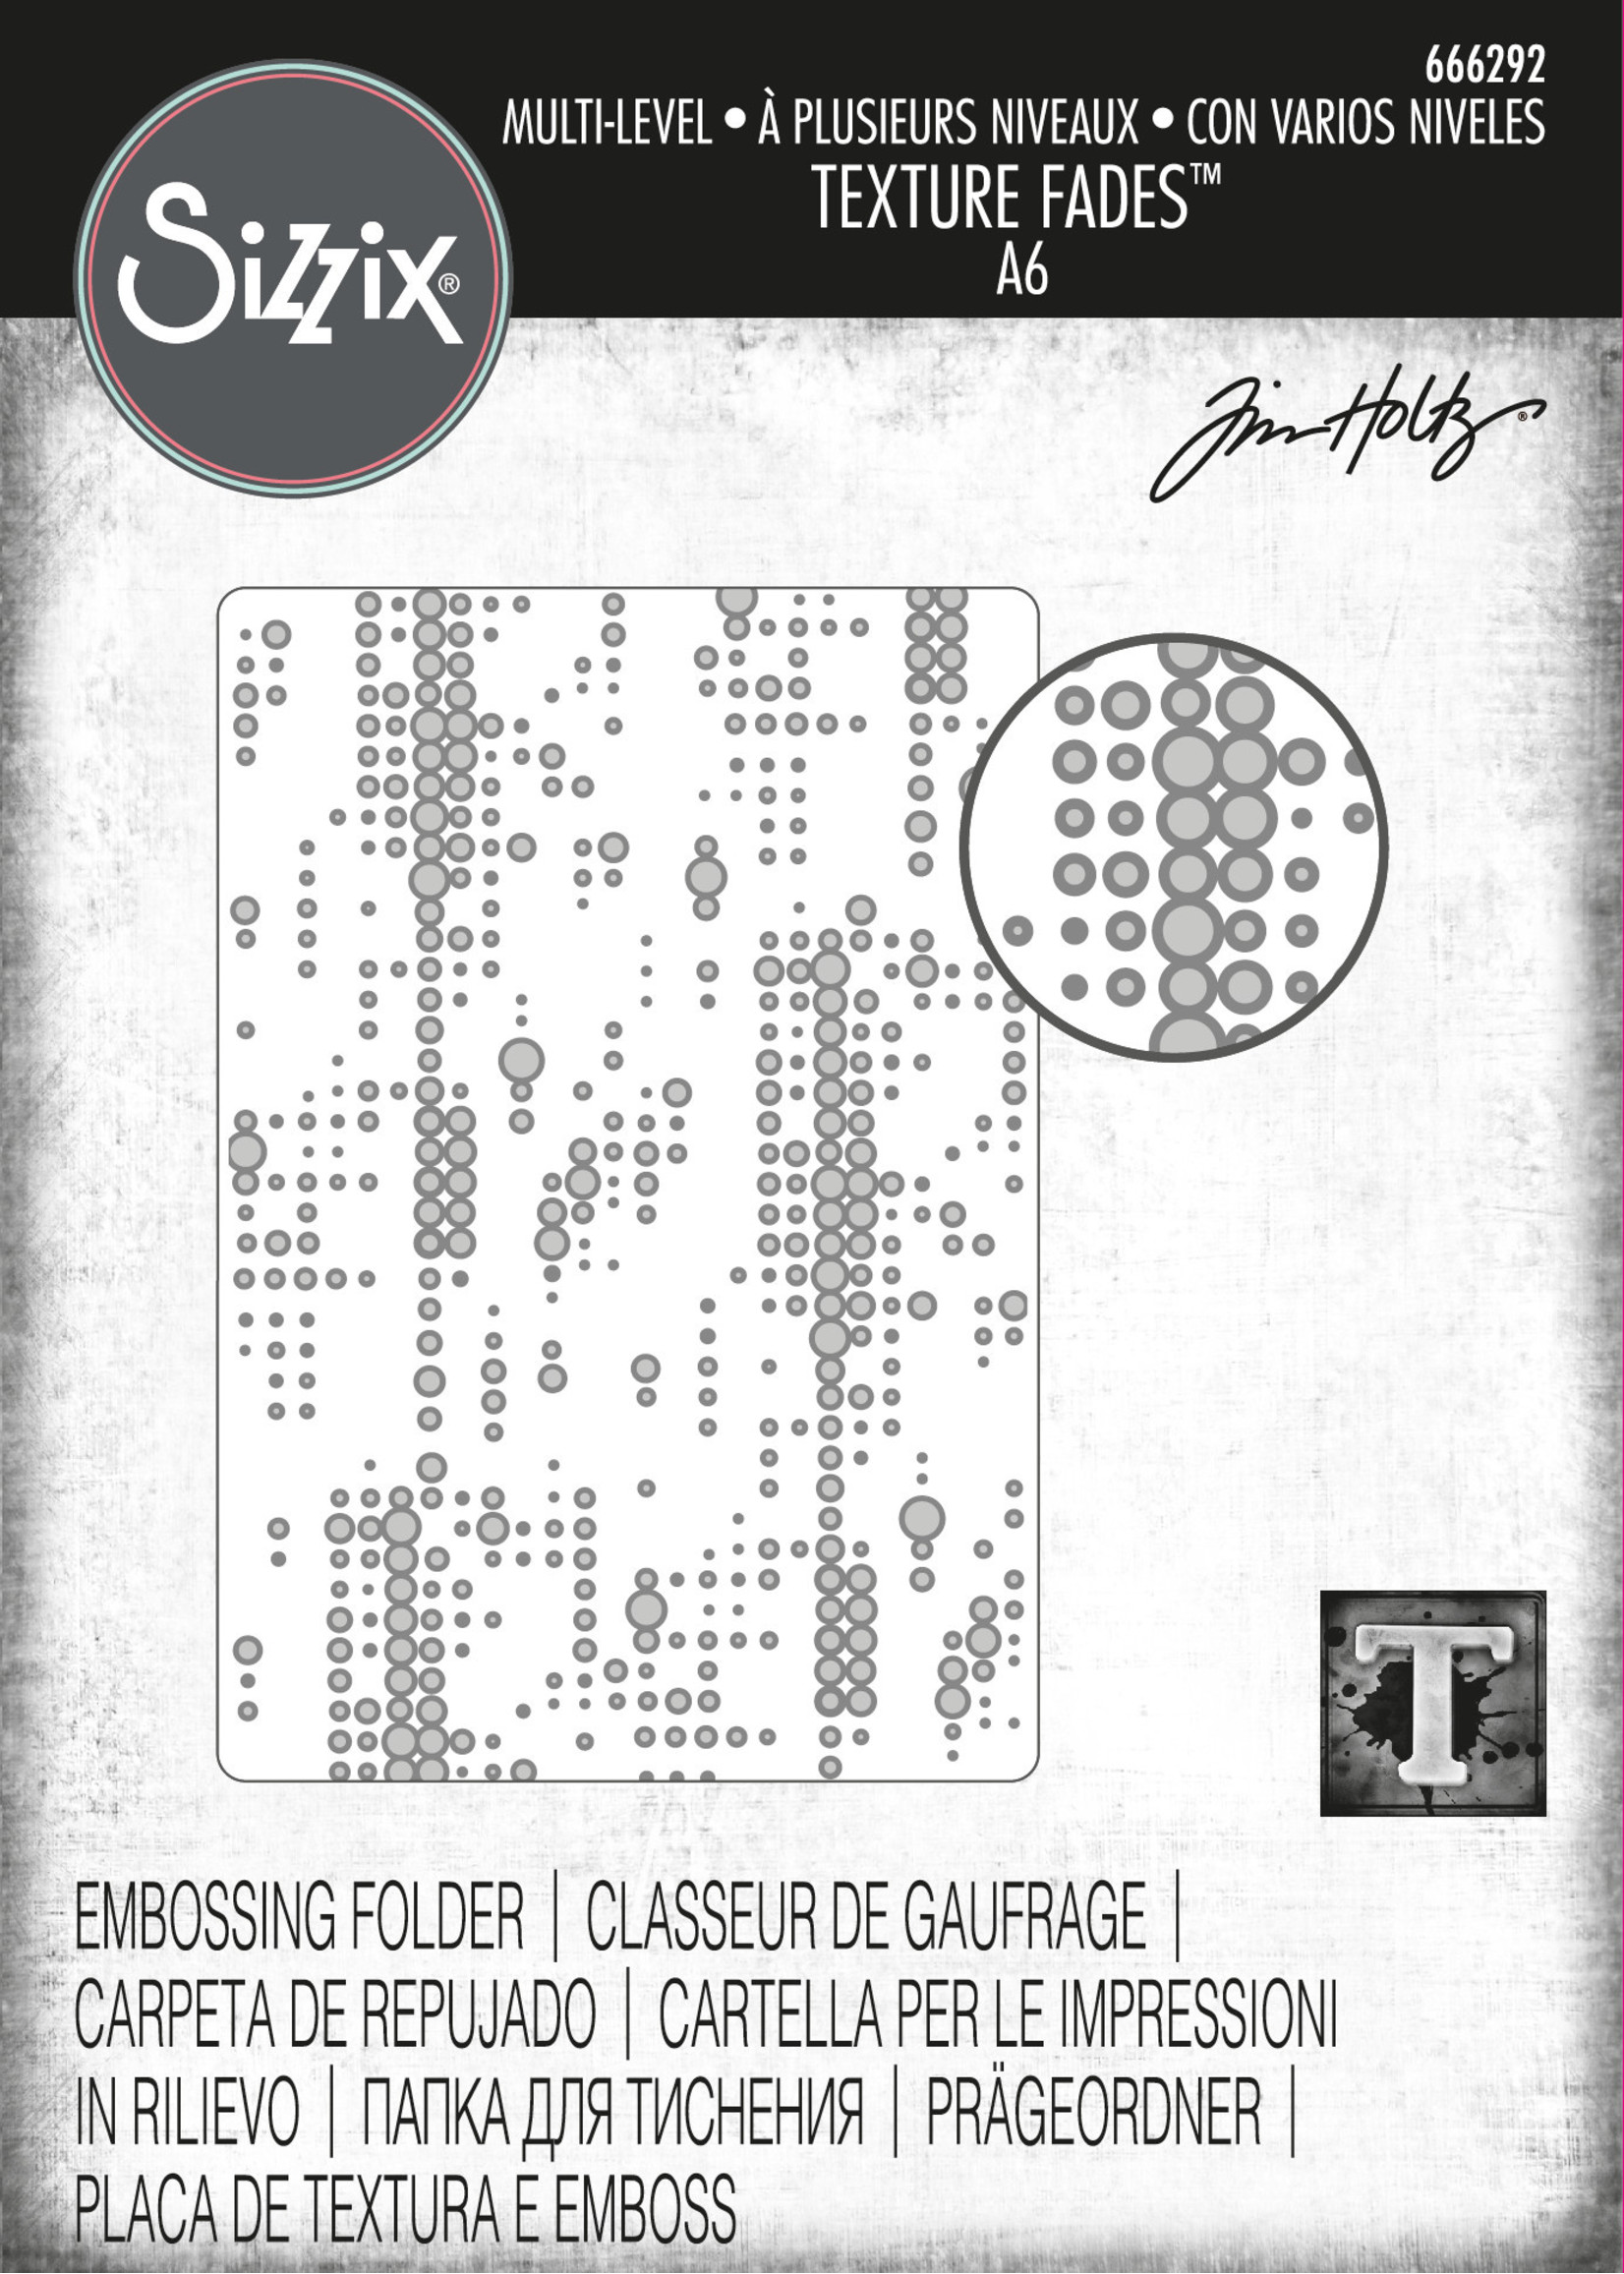 Sizzix Sizzix® Multi-Level Texture Fades™ Embossing Folder - Dotted by Tim Holtz®